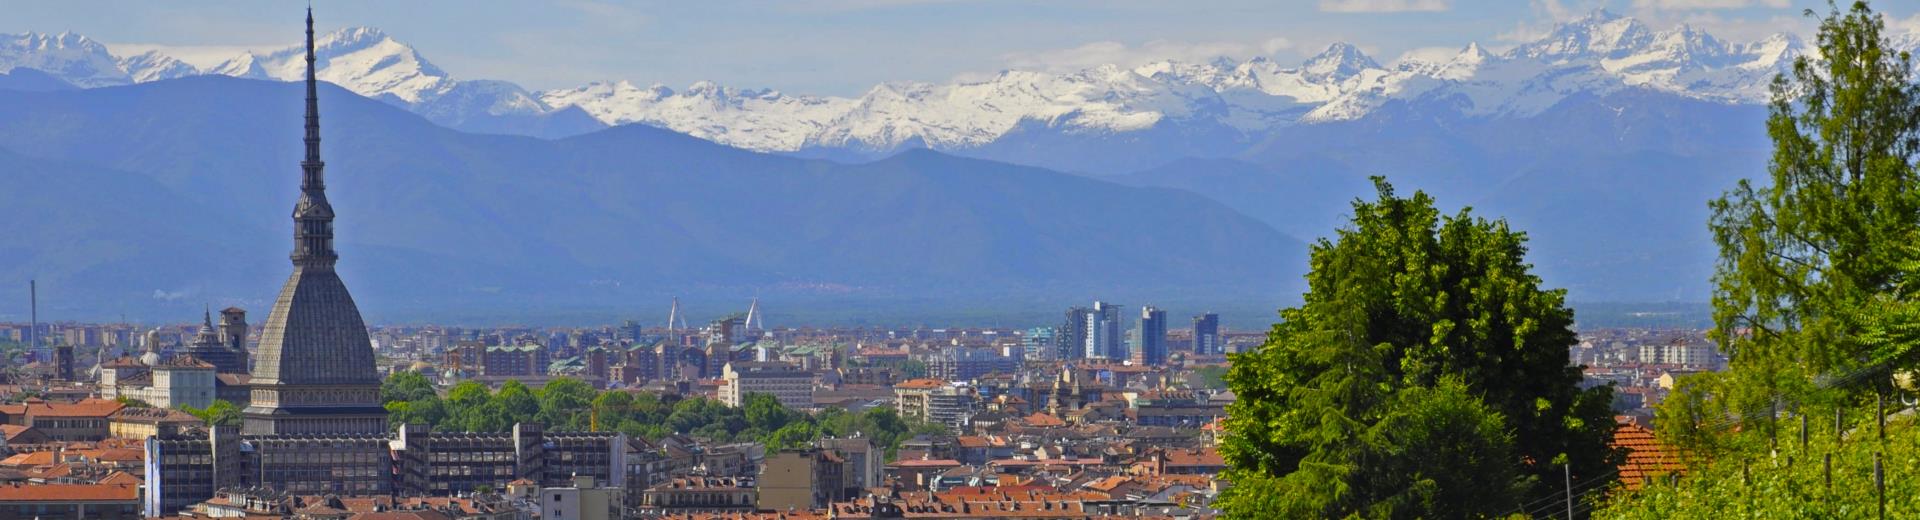 Discover the museums and beauties of Turin and Piedmont. At the BWP Hotel Le Rondini, just 20 minutes from the city center and Royal Palace of Venaria and 10 from Turin airport. Take advantage of the our offer!